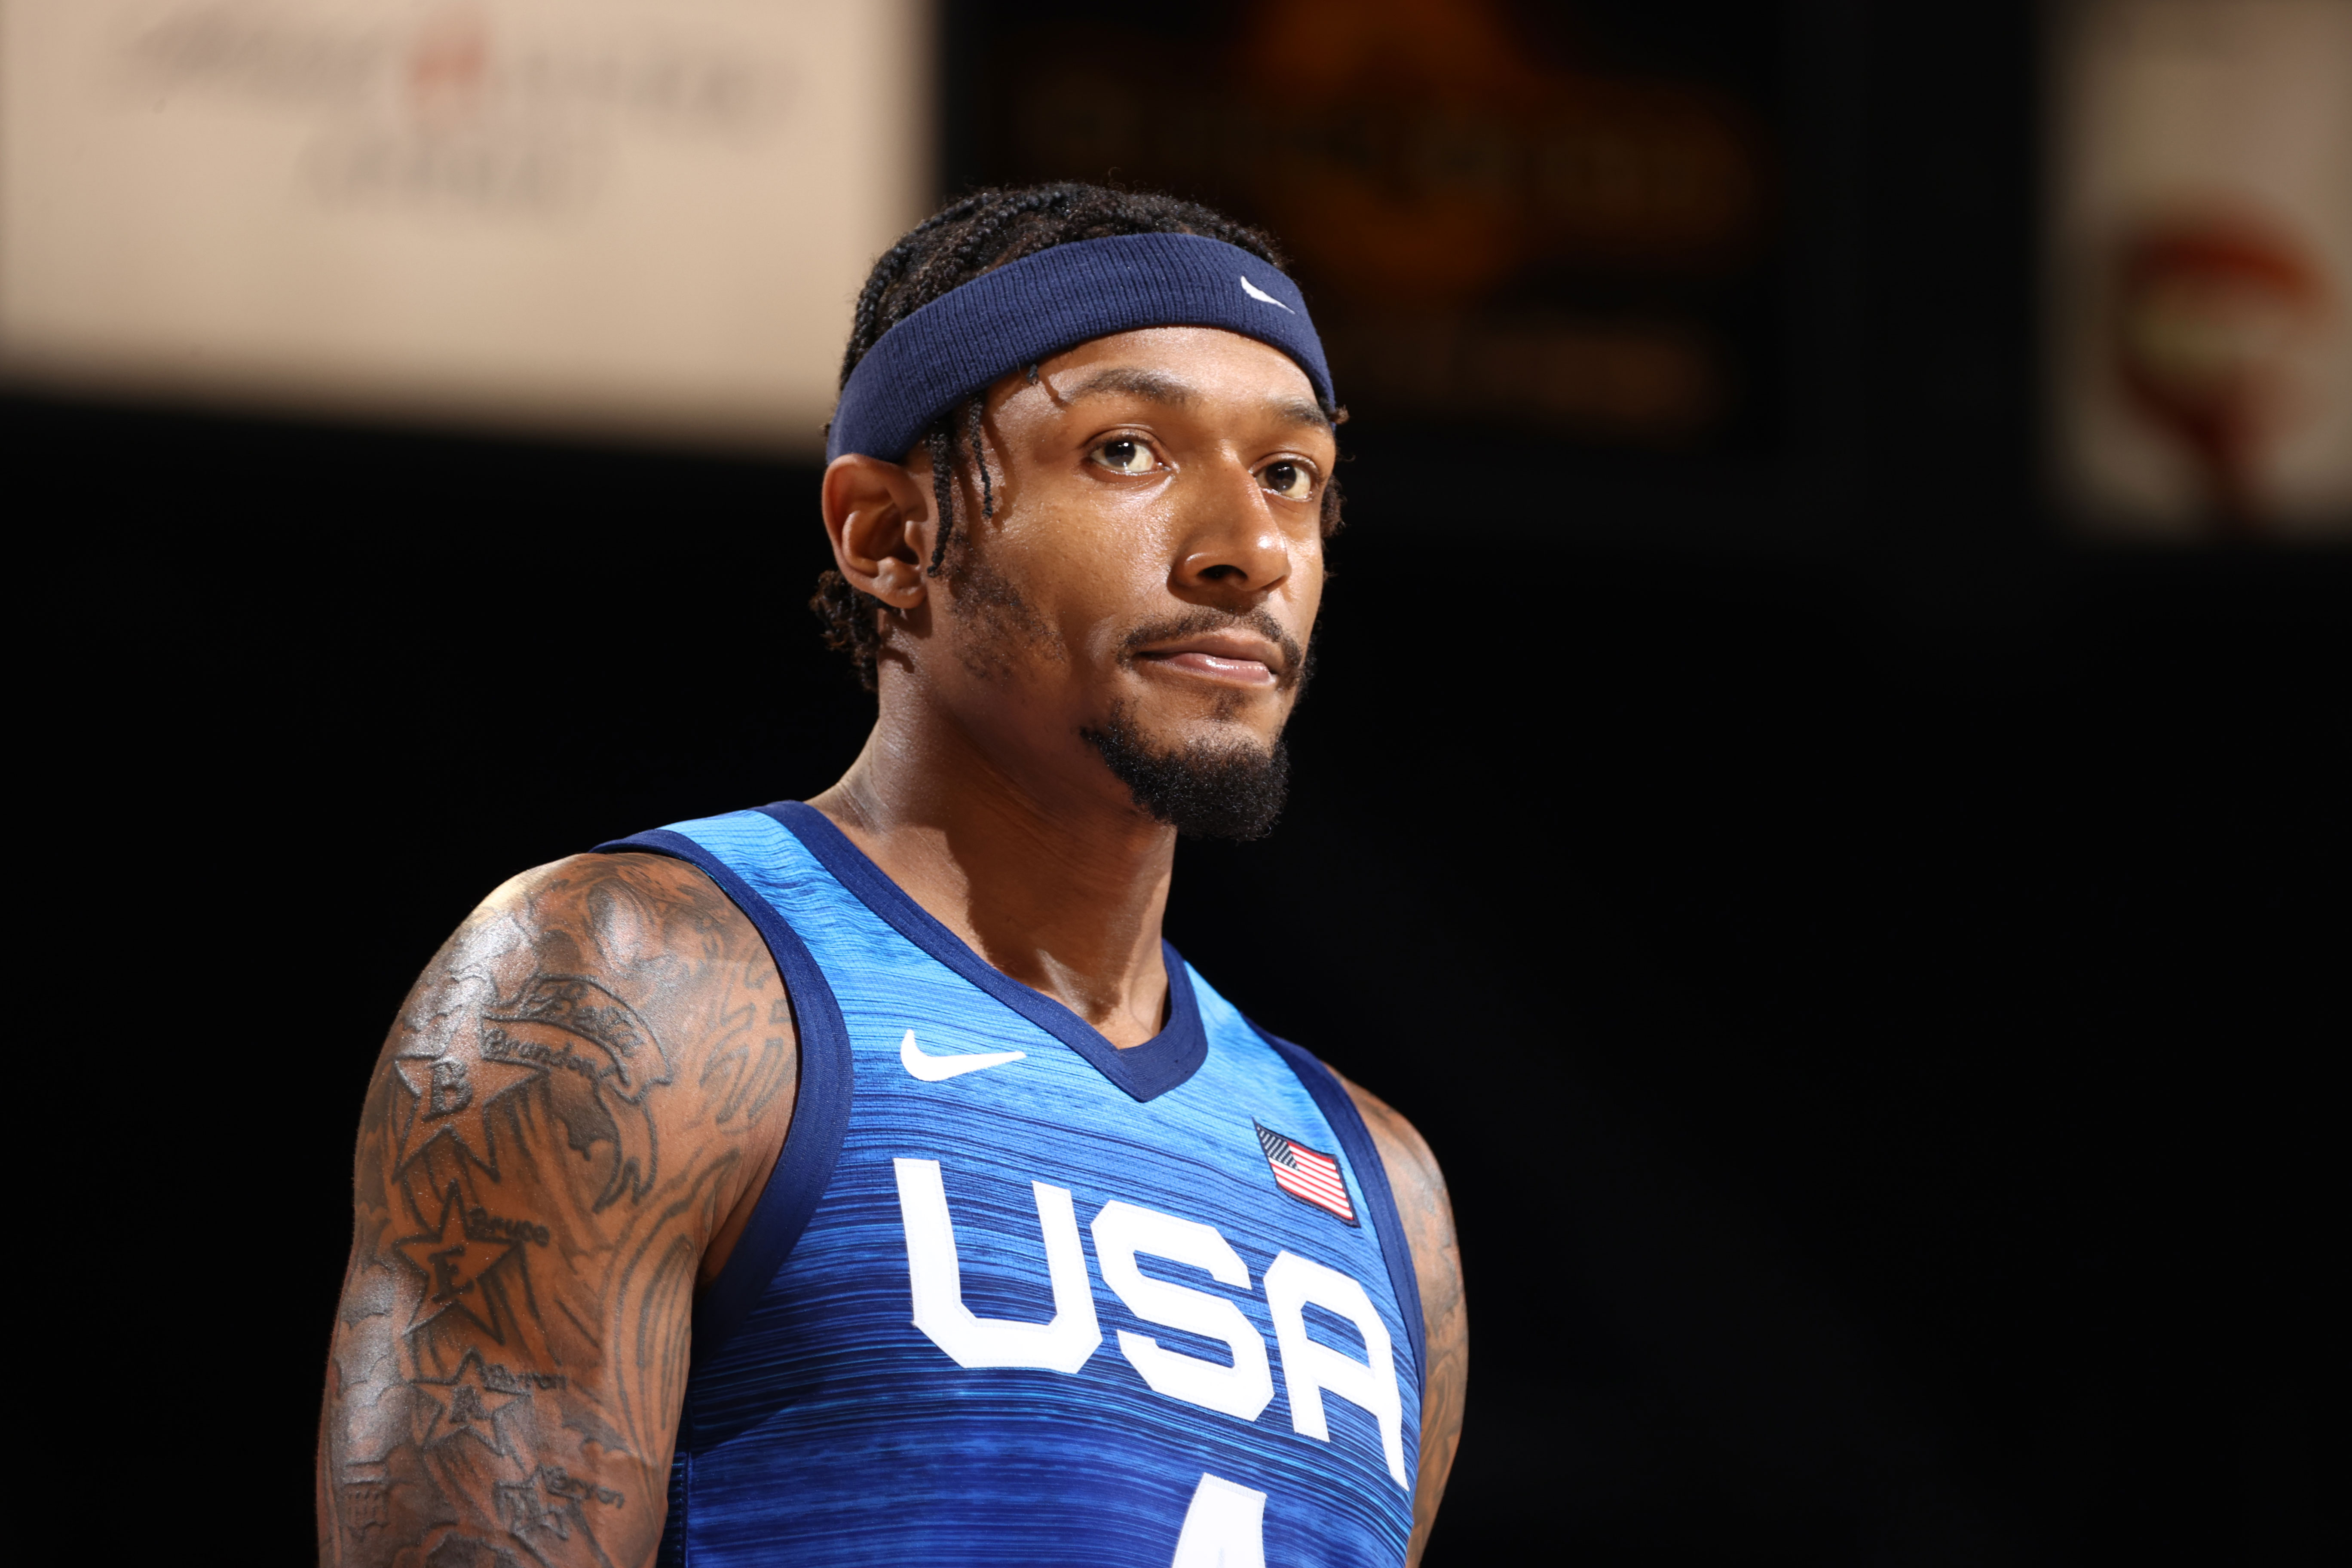 Team USA basketball guard Bradley Beal looks on during a game against Argentina in Las Vegas on July 13, 2021.